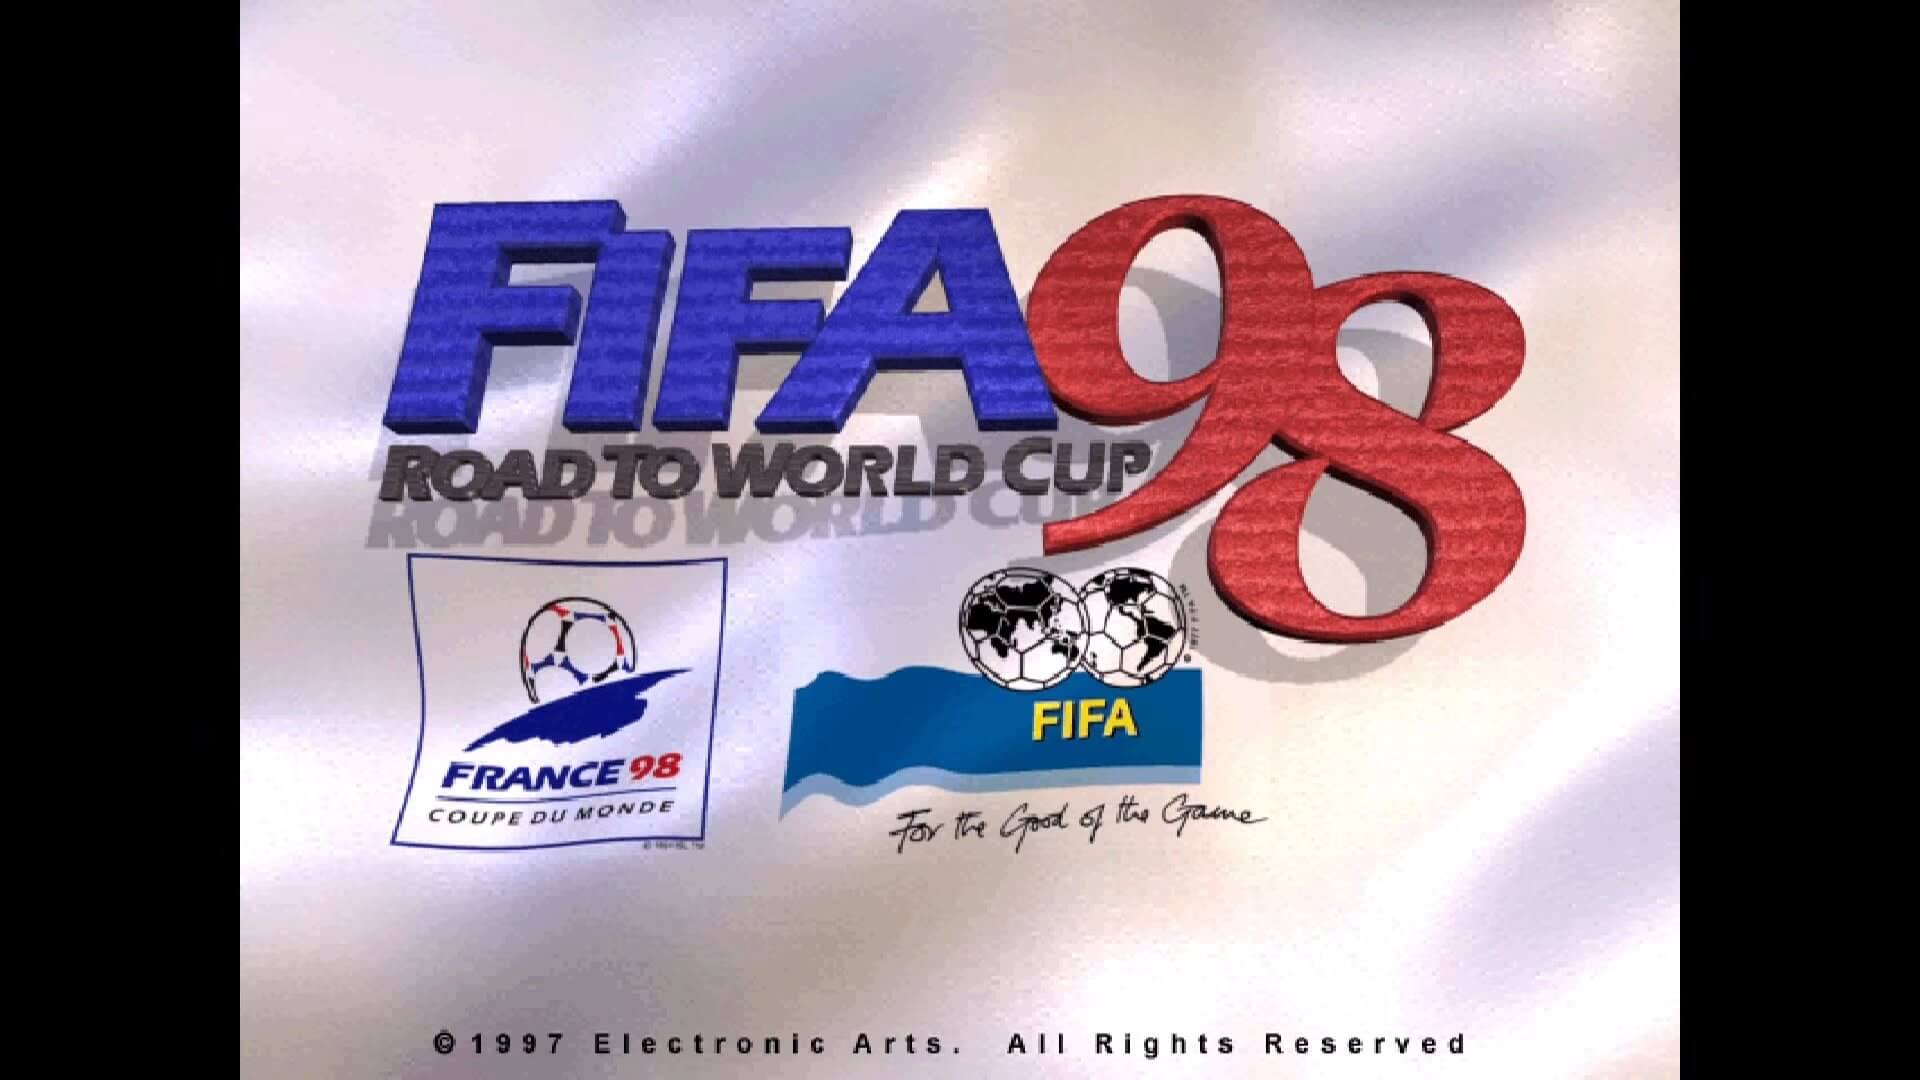 FIFA 98 - Road to World Cup (Europe) (En,Fr,Es,It,Sv) ROM